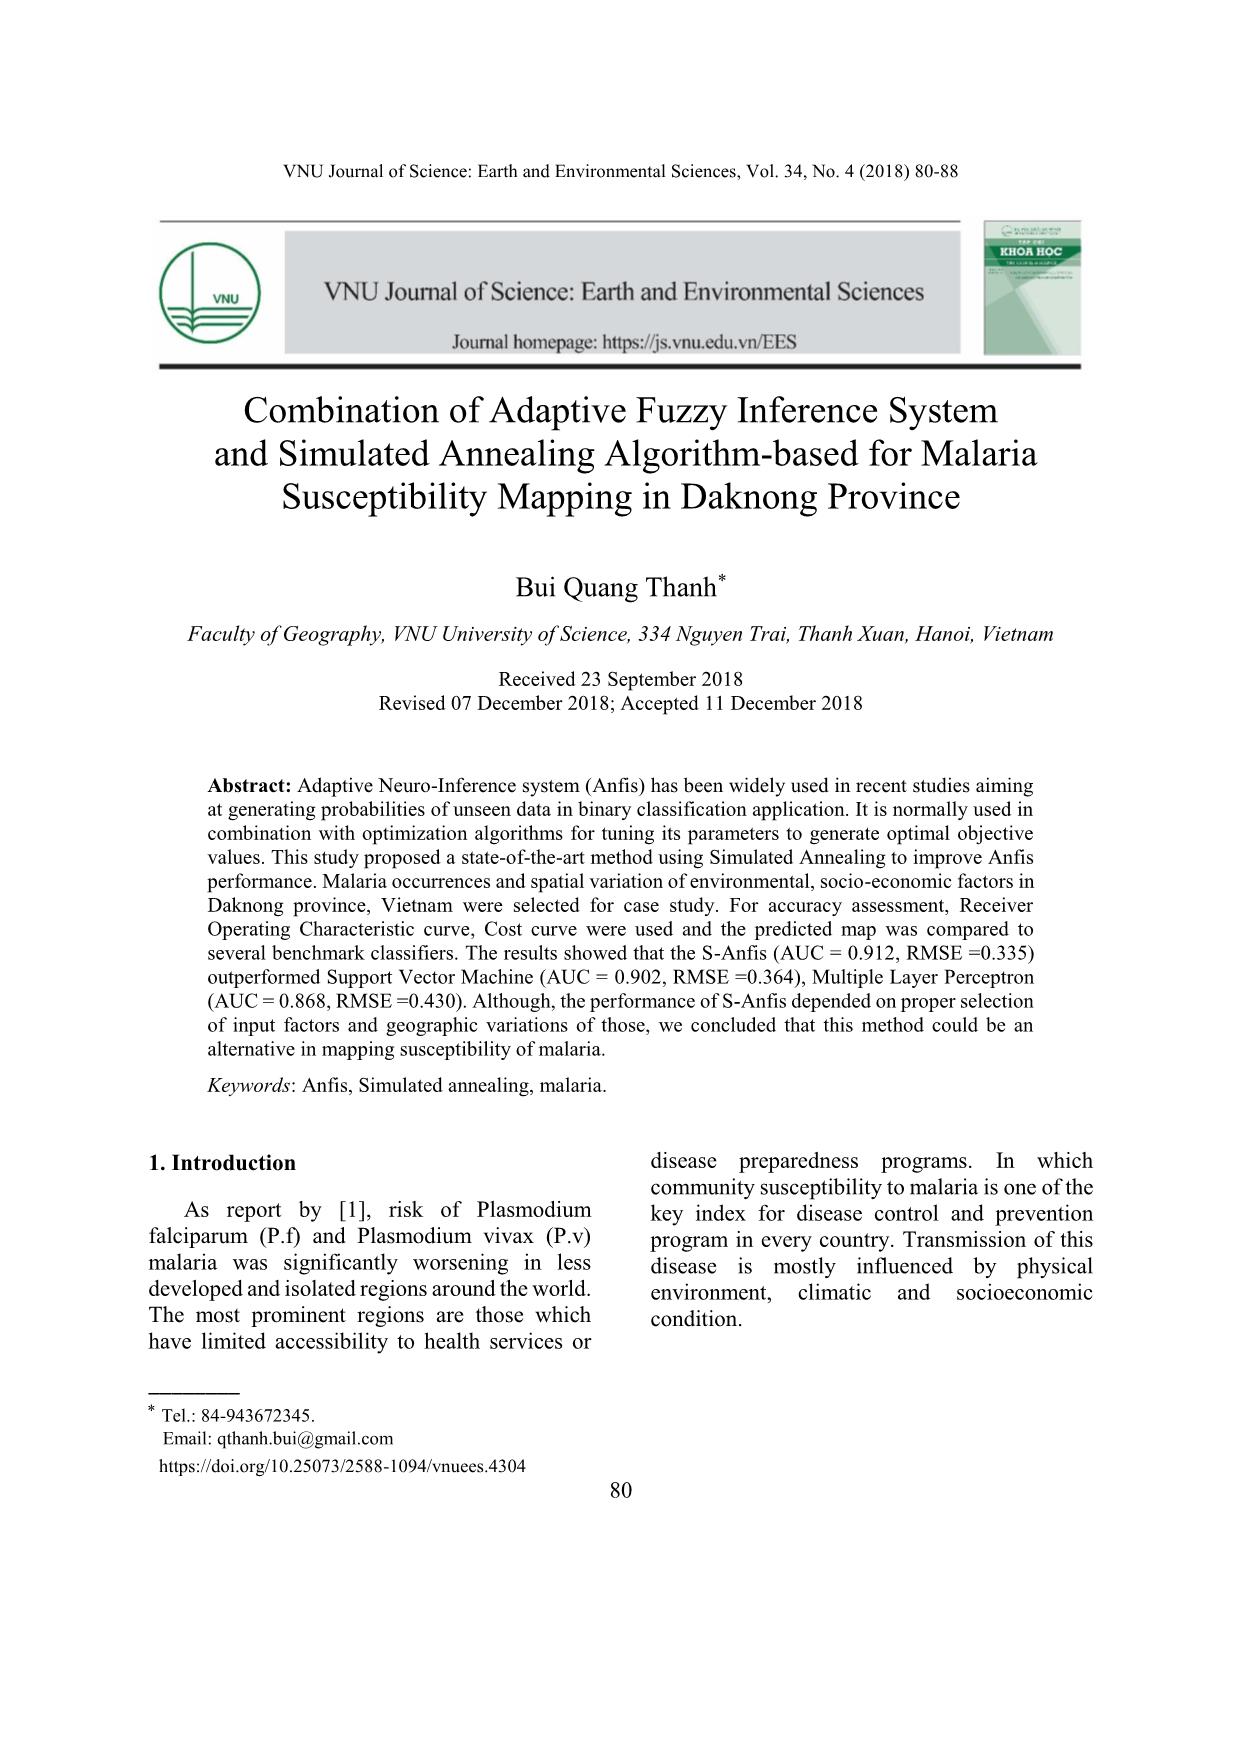 Combination of Adaptive Fuzzy Inference System and Simulated Annealing Algorithm-Based for Malaria Susceptibility Mapping in Daknong Province trang 1